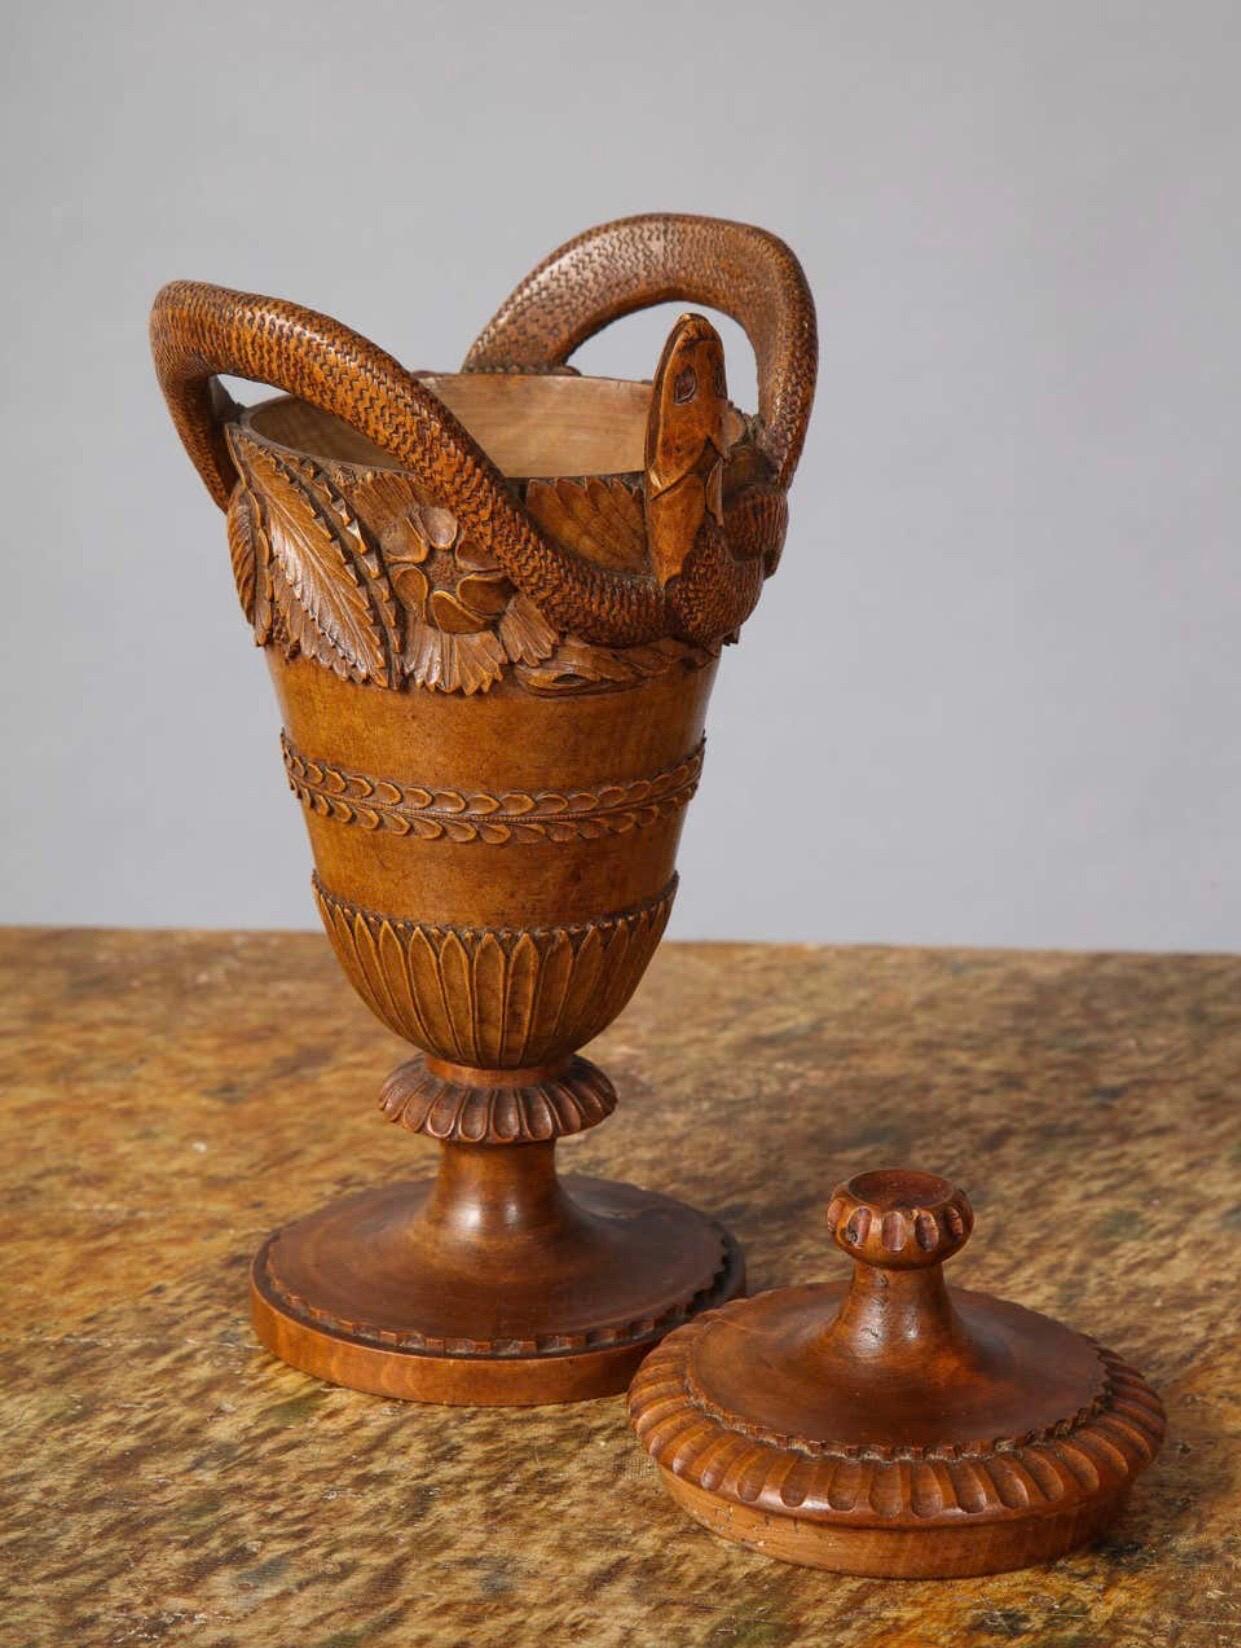 A fine French neoclassical early 19th century turned and carved urn with cover. A carved snake encircling a gadrooned cover. The tapering vase with 3 sections of various leaf carvings.